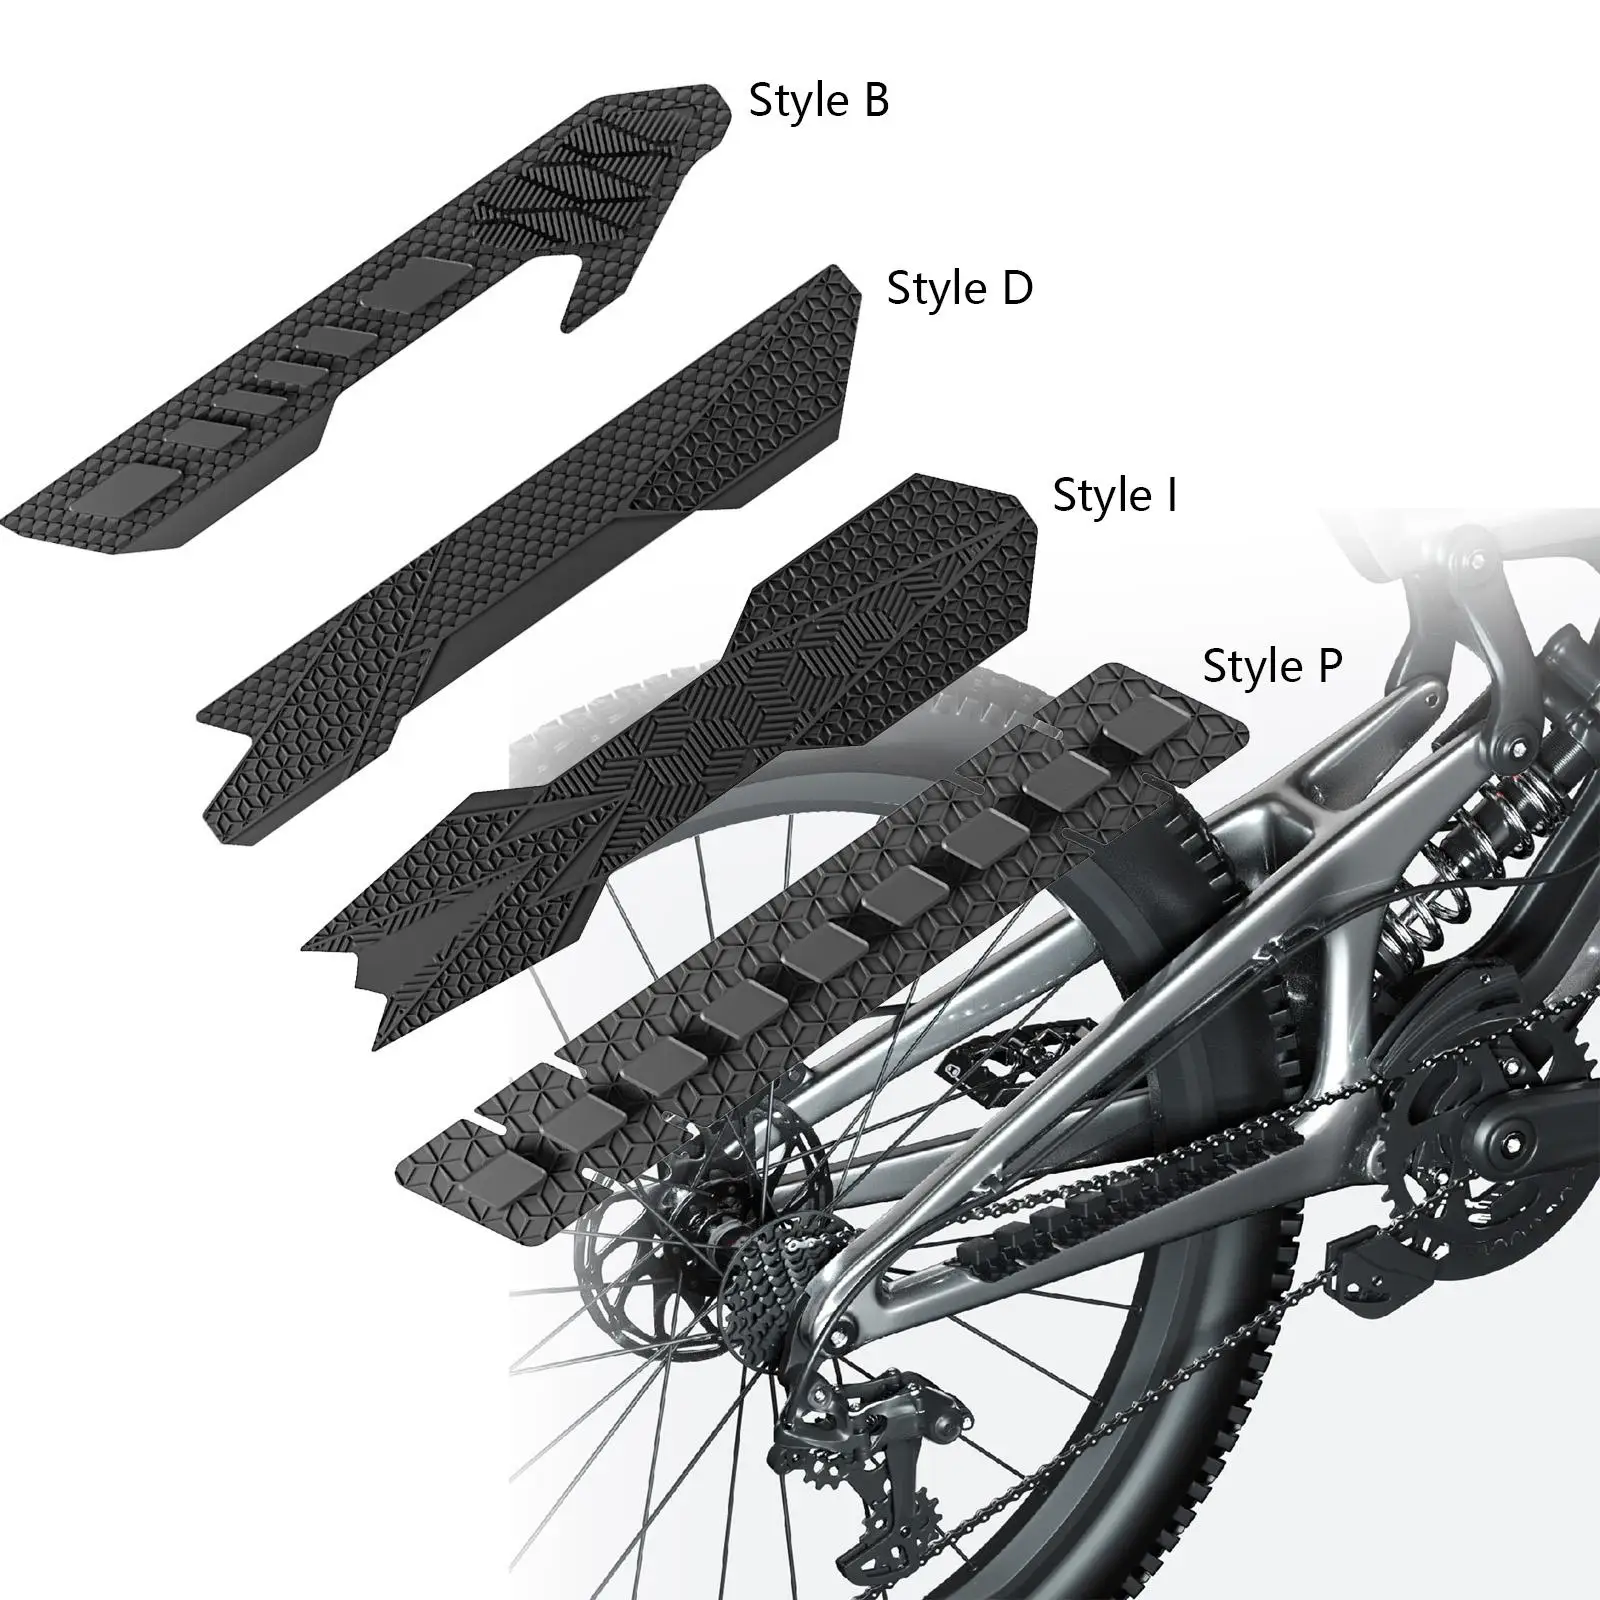 Bike Chainstay Protector, Silicone Material Guard for Chain Sticker, Bicycle Frame Paster Protective Pad, Wear Resistant